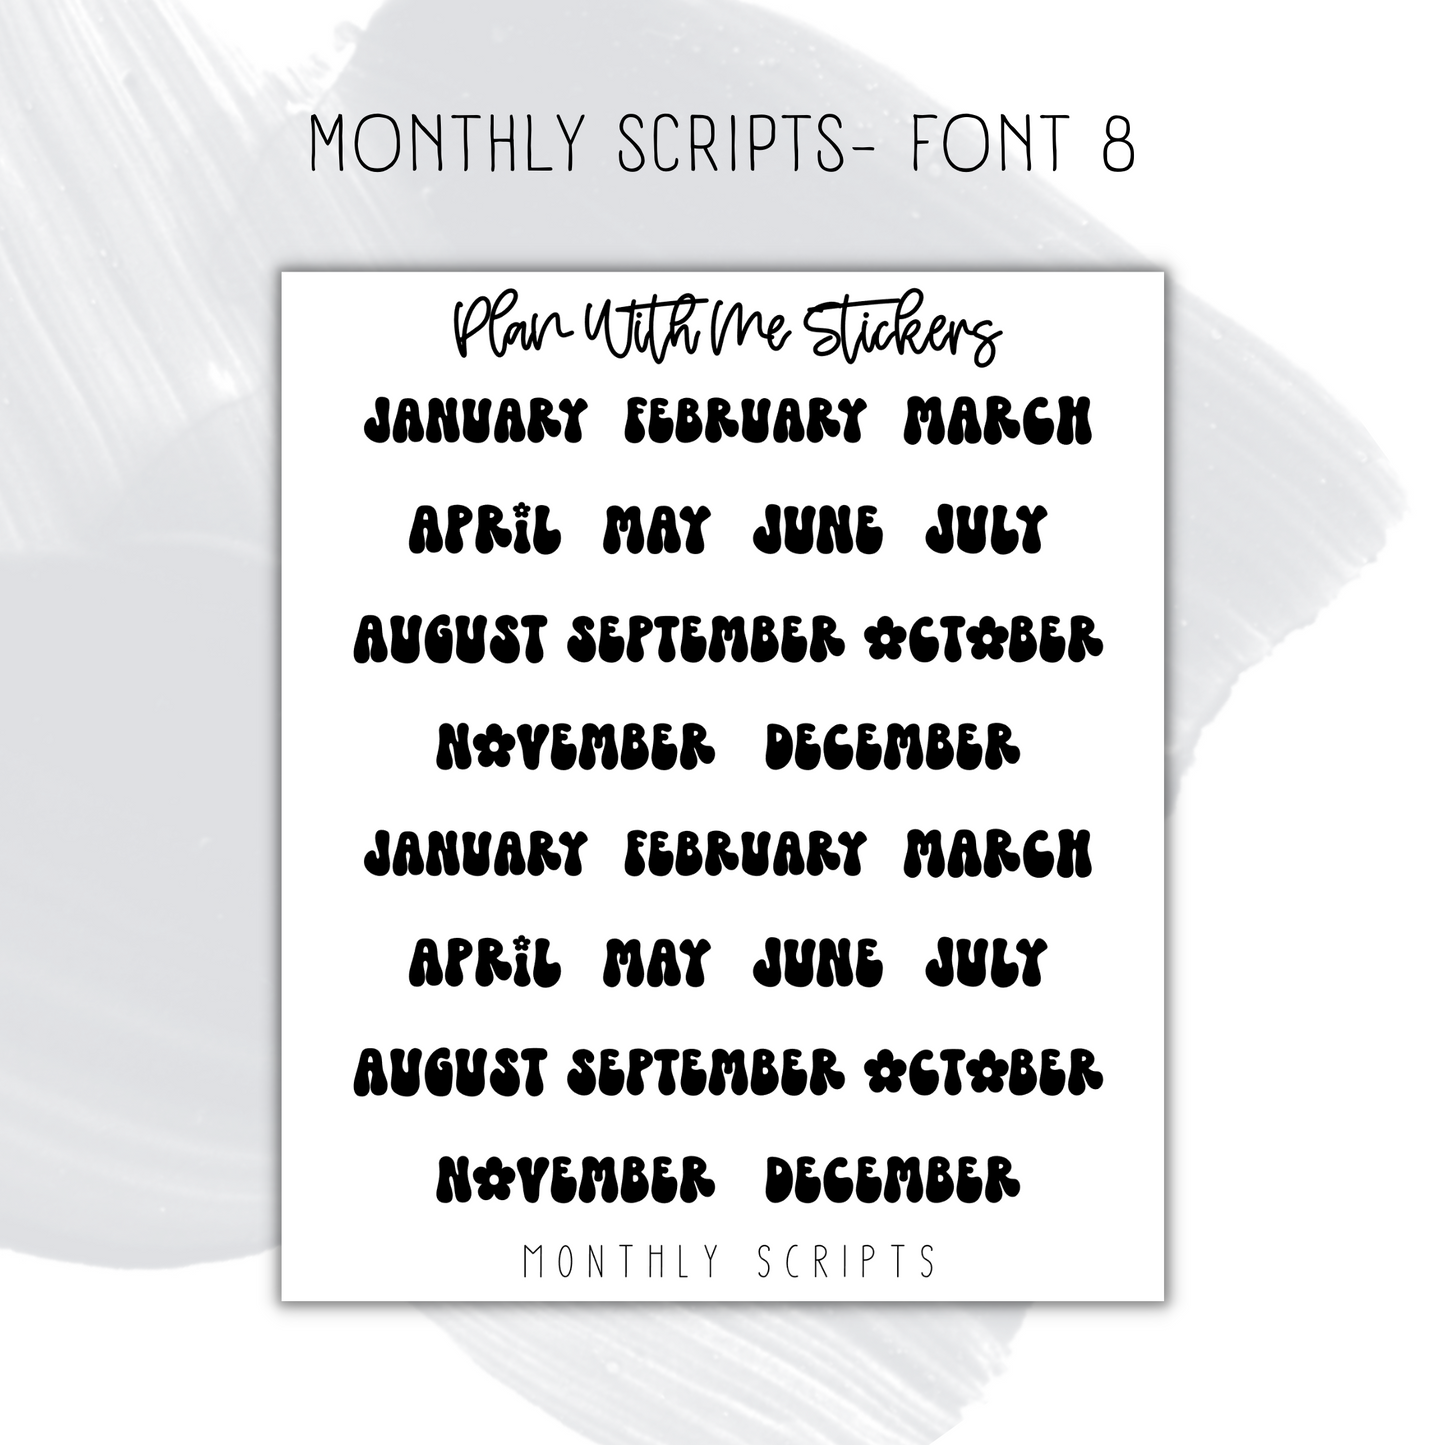 Monthly Scripts- Font 8